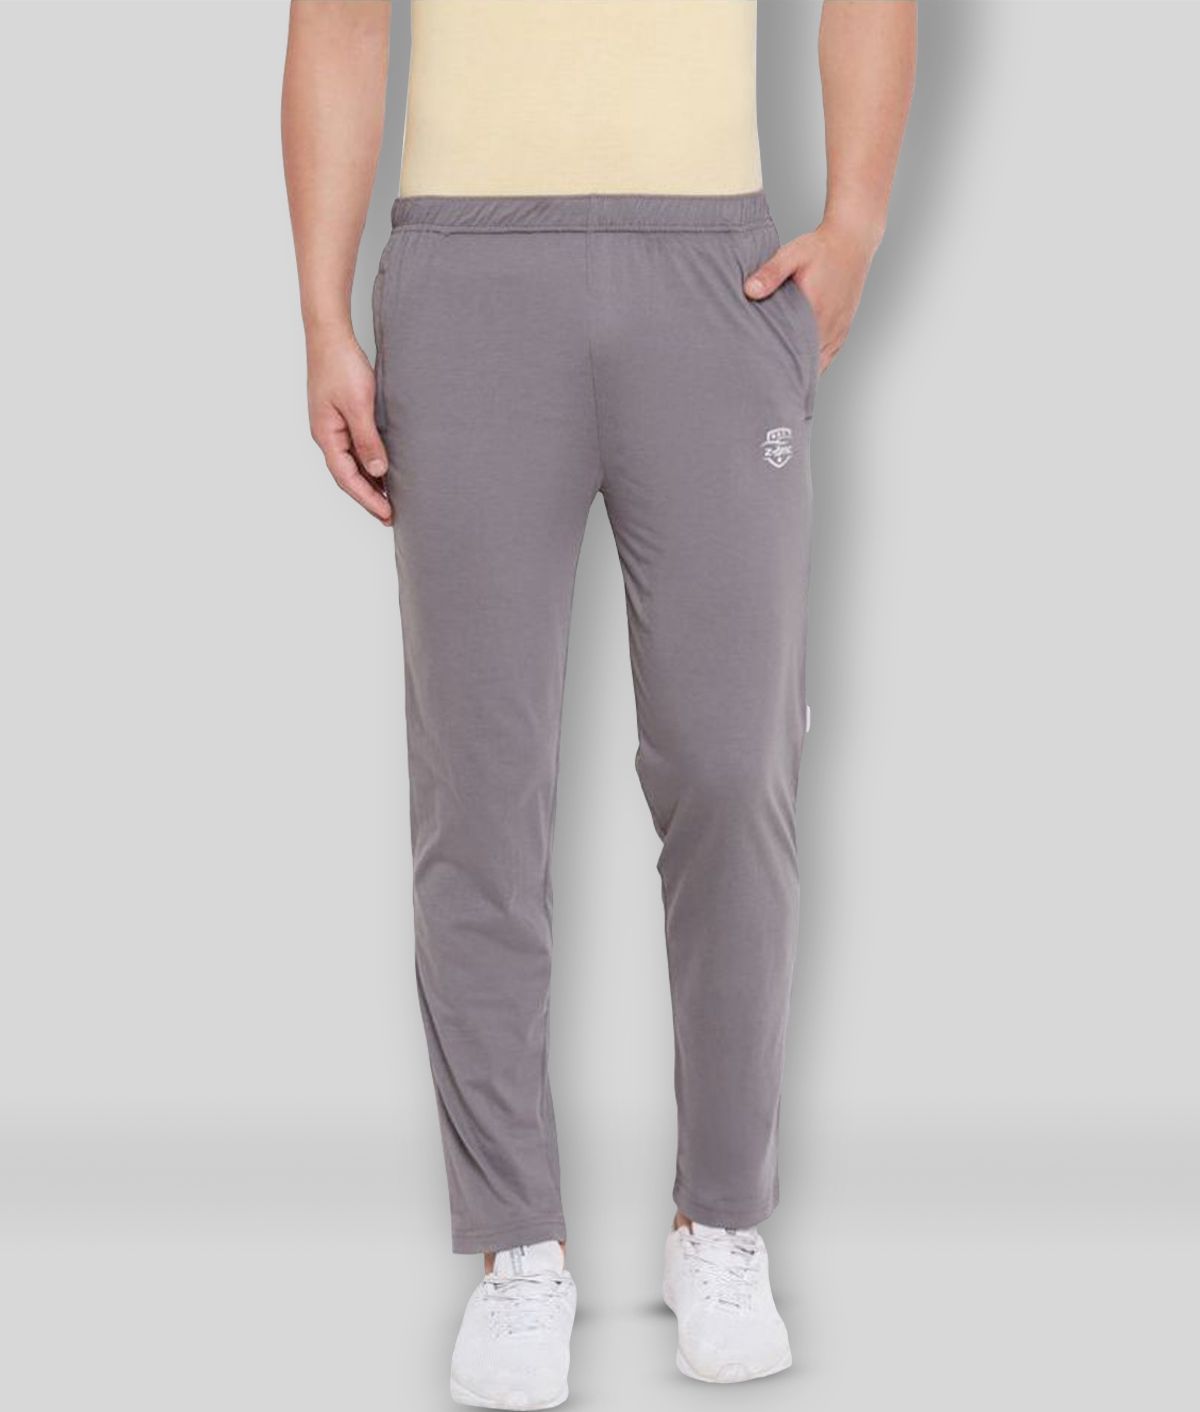     			ZOTIC - Grey Cotton Blend Men's Trackpants ( Pack of 1 )